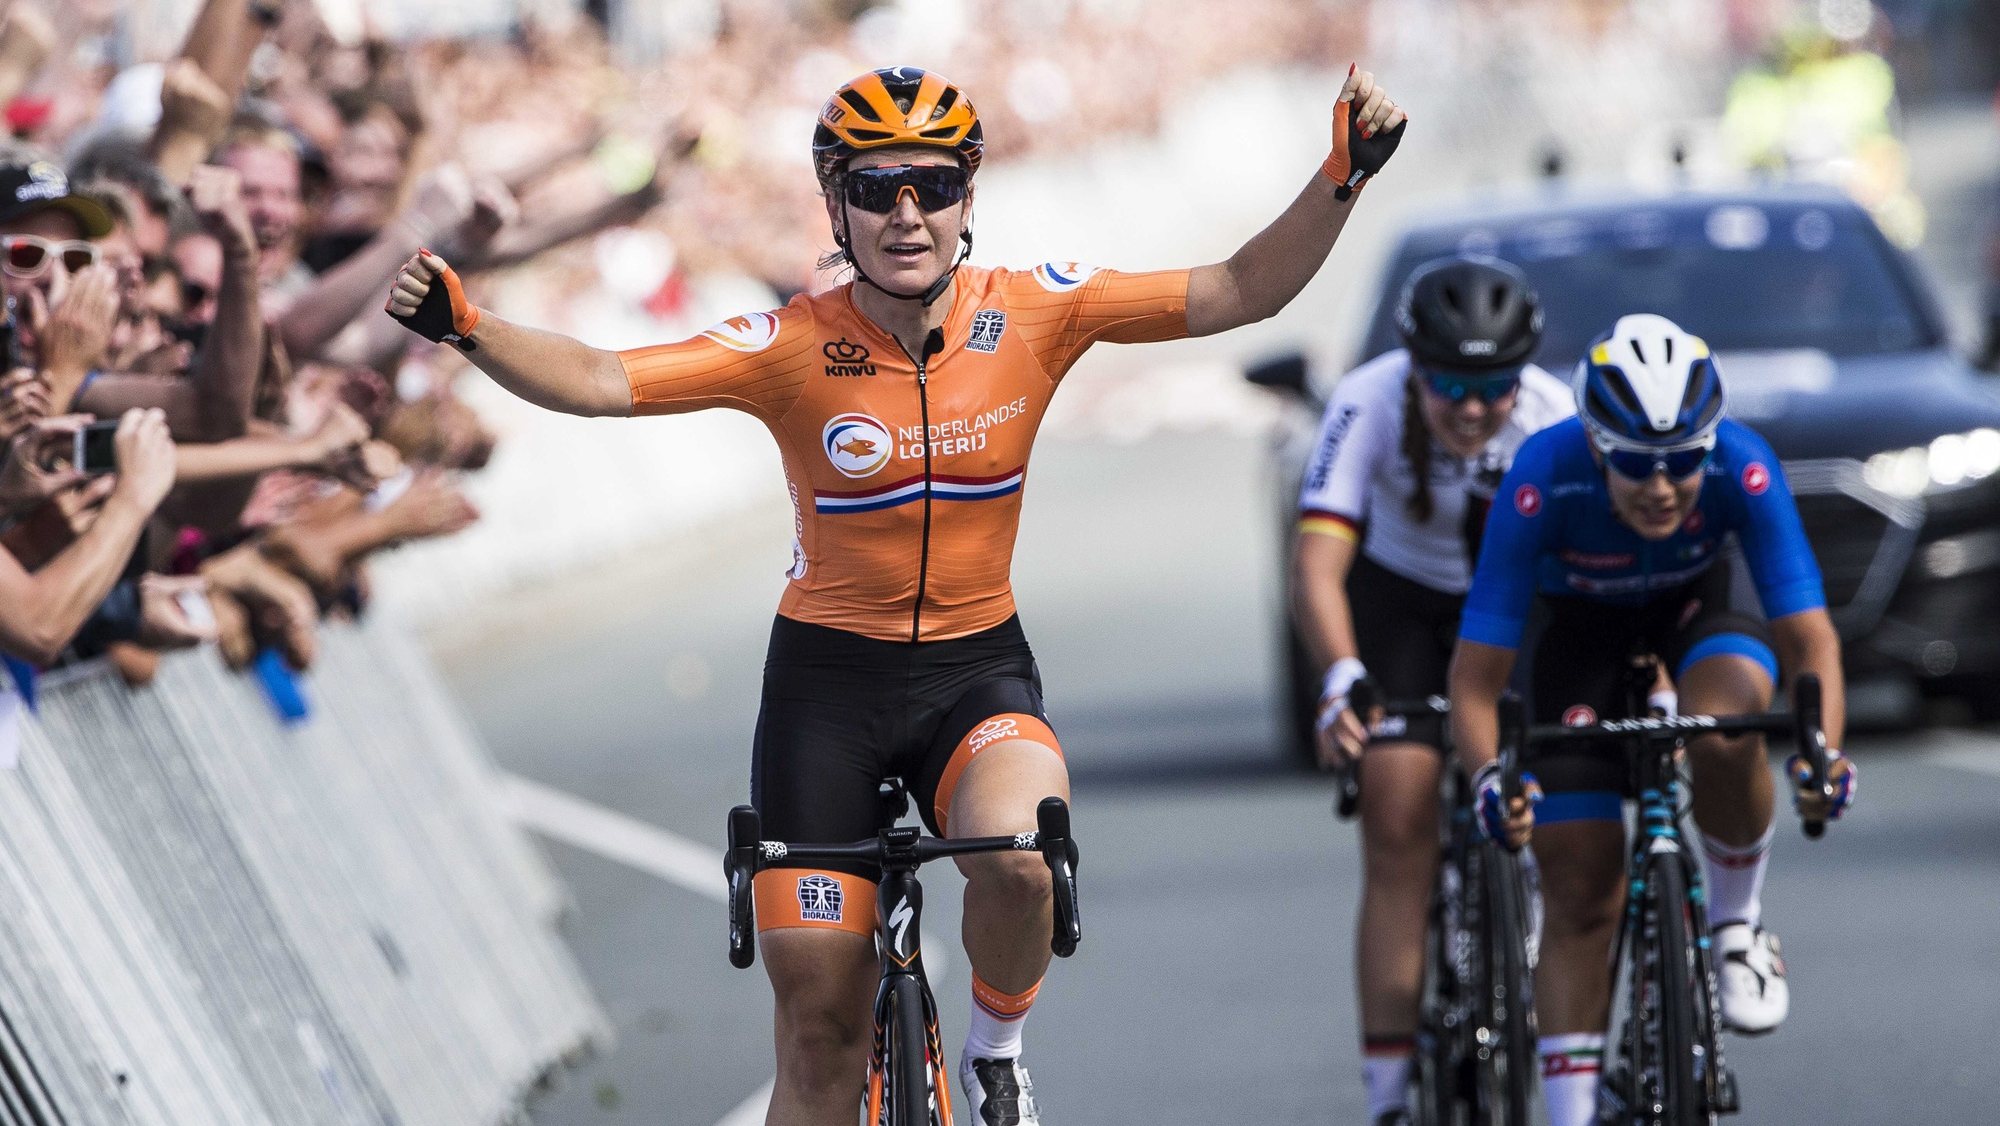 epa07766347 Dutch Amy Pieters wins the women&#039;s elite road race ahead of Elena Cecchini (Italy, R,second) and Lisa Klein (Germany) at the European Cycling Championship in Alkmaar, The Netherlands, 10 August, 2019.  EPA/Vincent Jannink